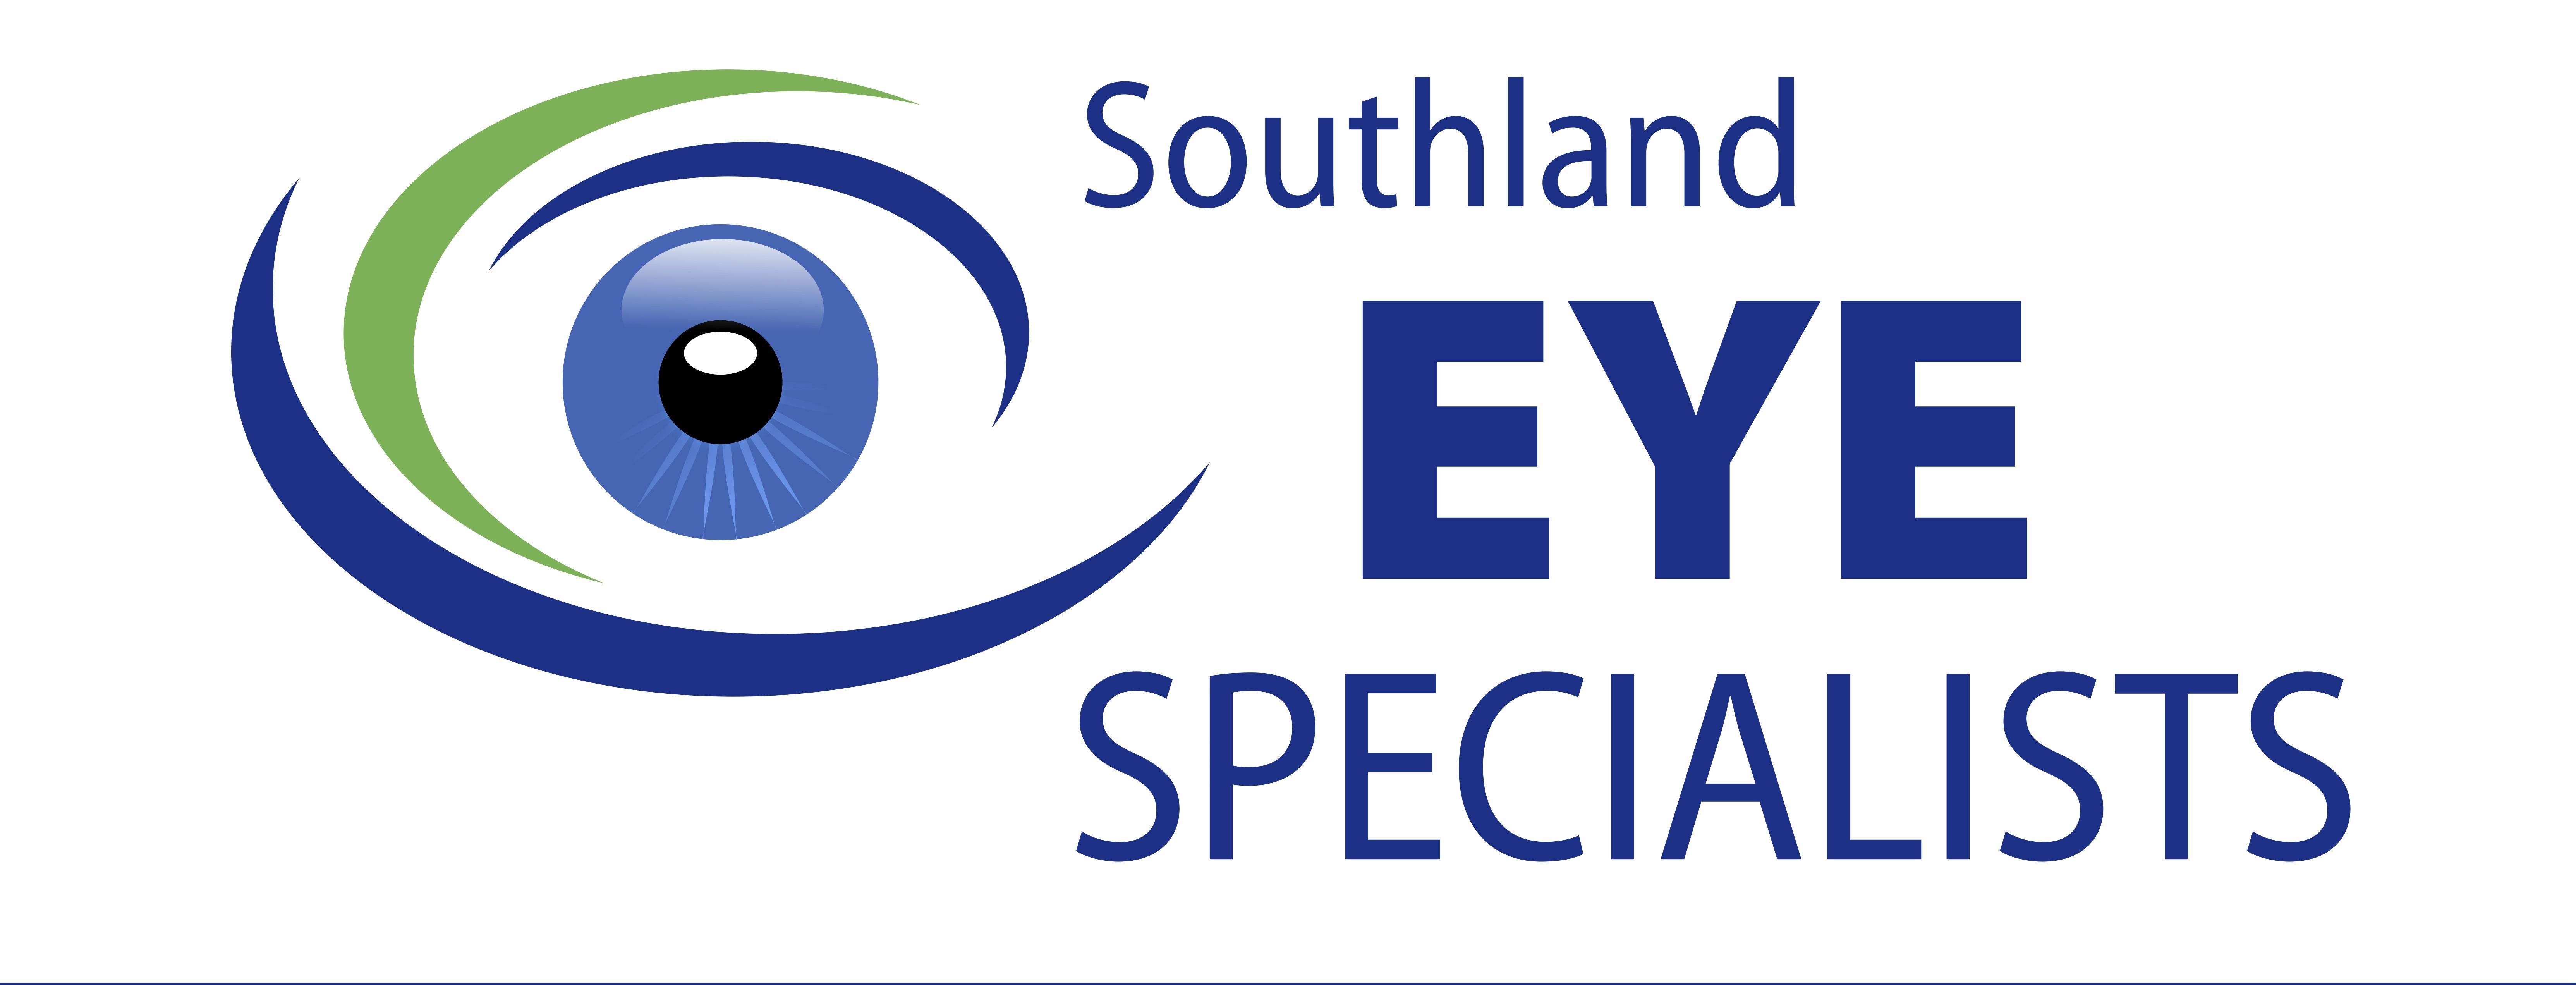 Southland Eye Specialists